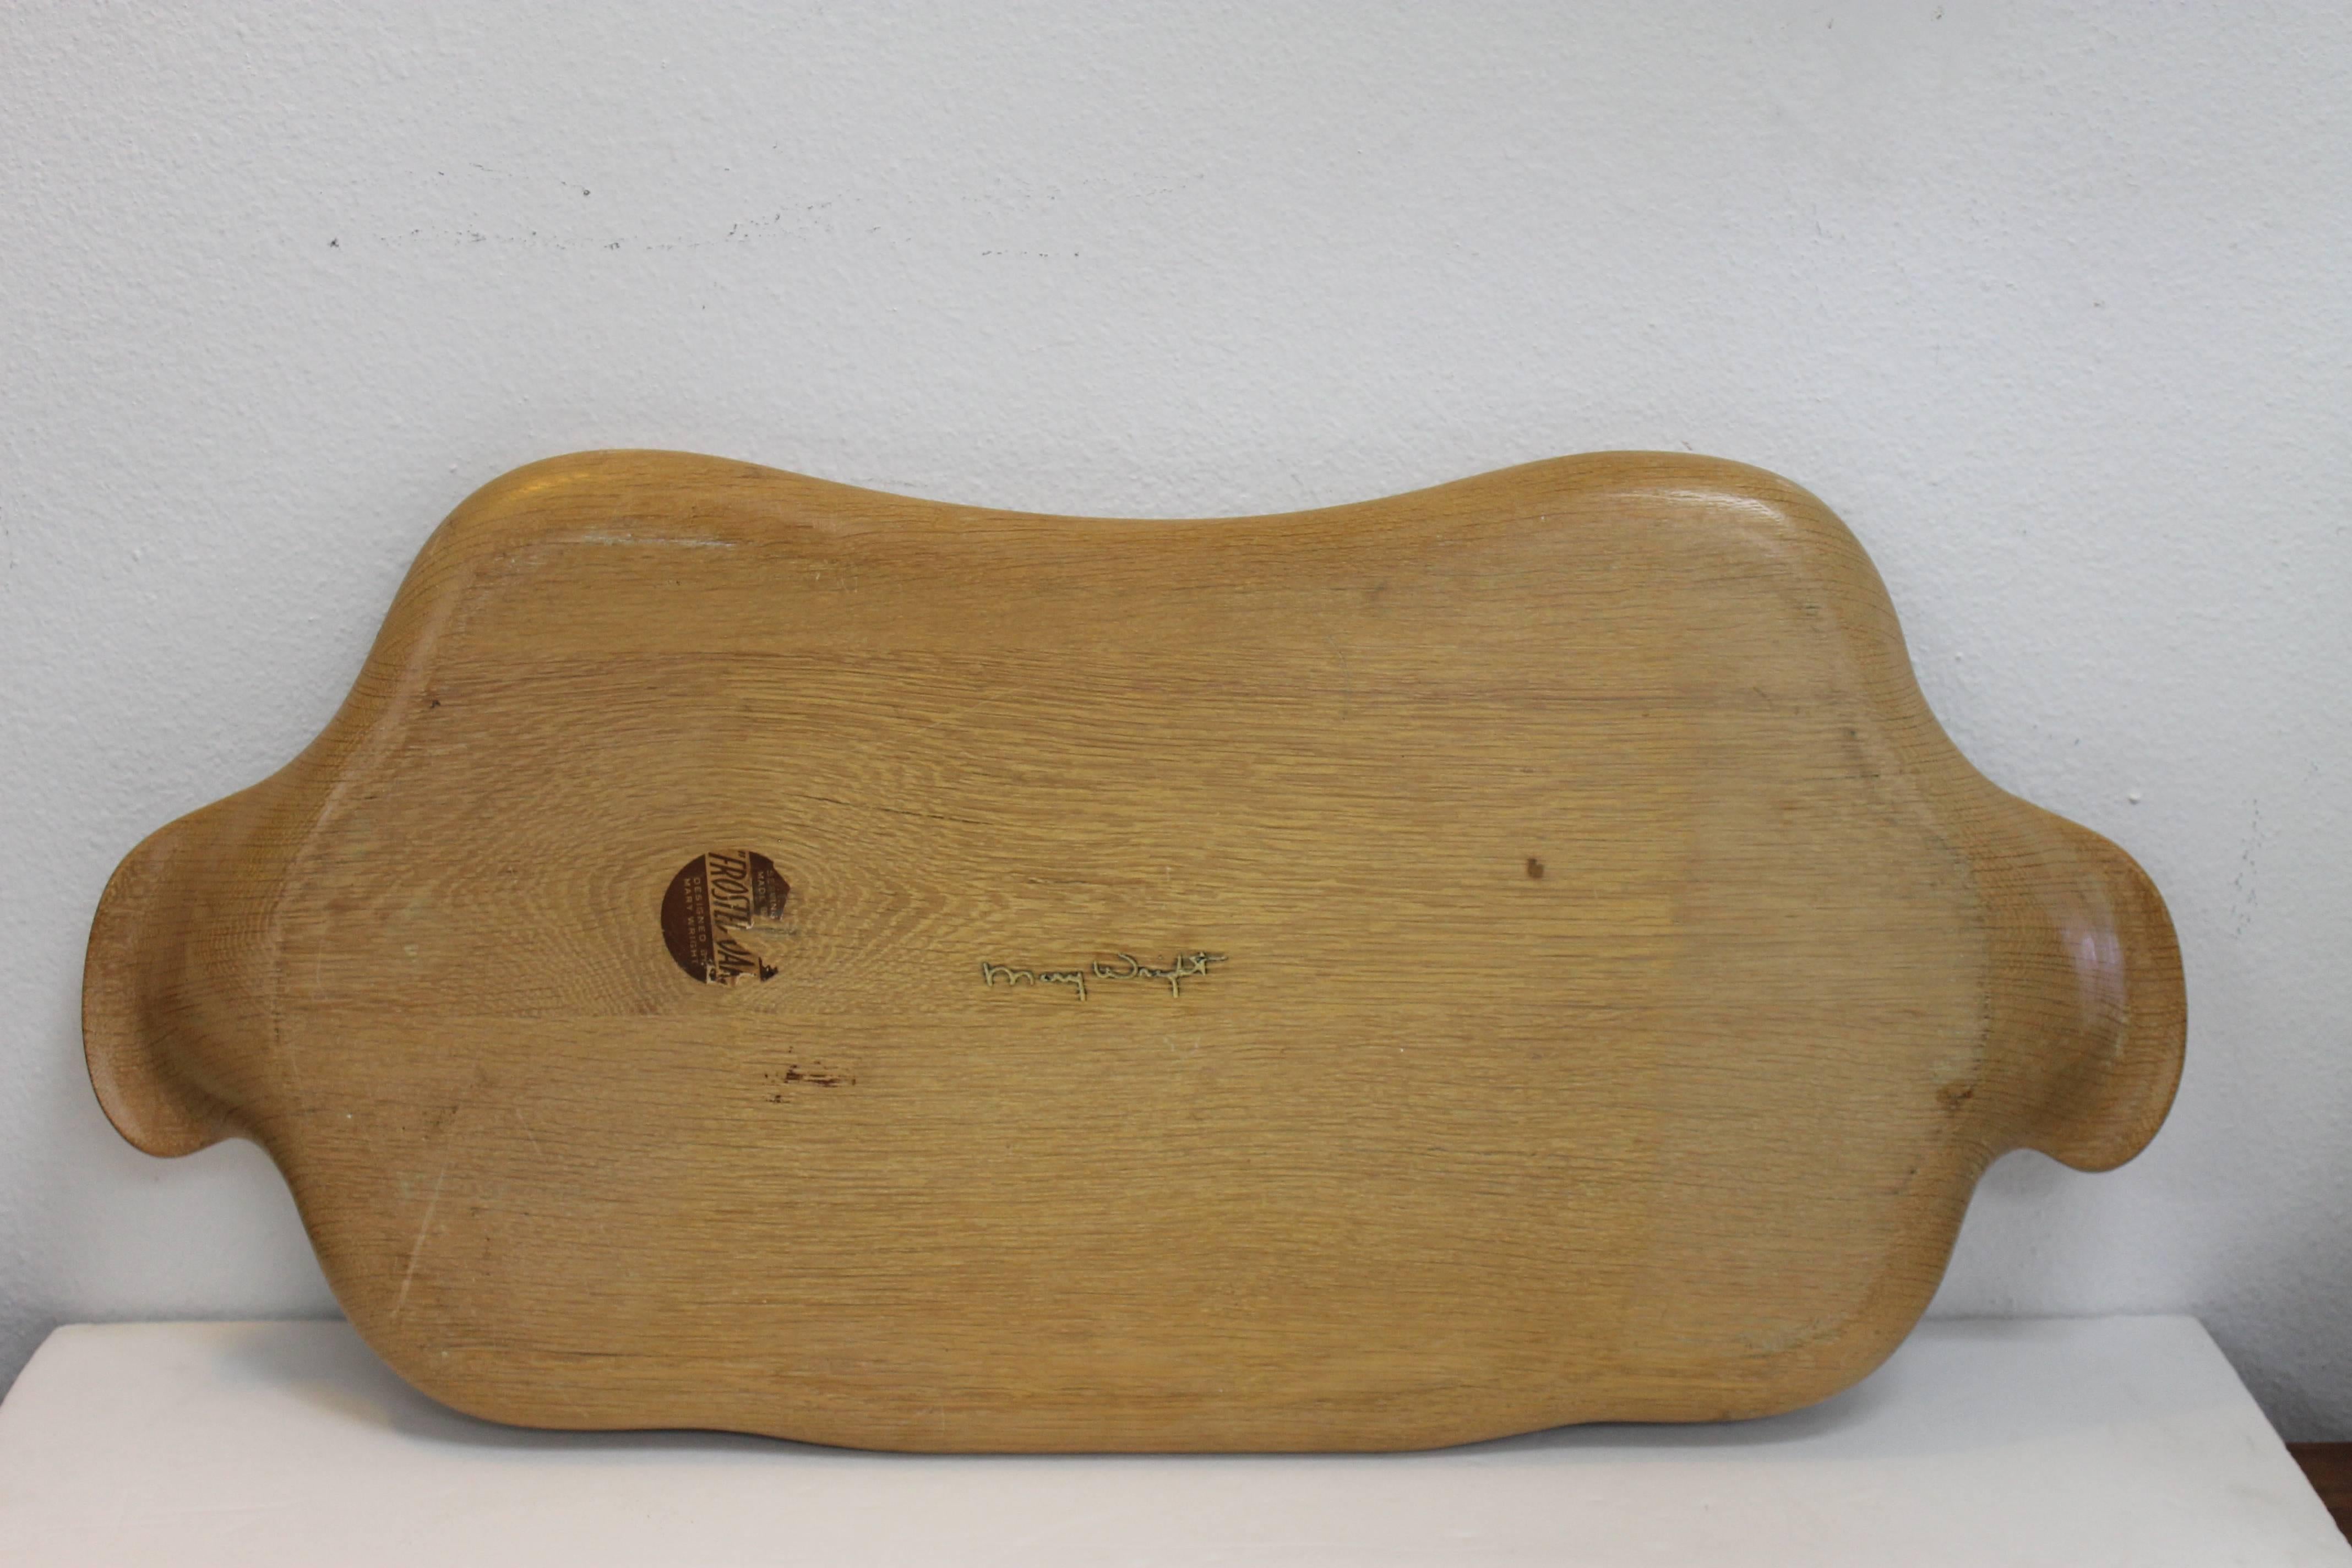 Mary Wright frosted oak serving or hostess tray. Contains the frosted oak label. Part of a wood line designed by husband and wife industrial designers Russel Wright / Mary Wright. This tray is pictured on page 120 in the collectors encyclopedia of